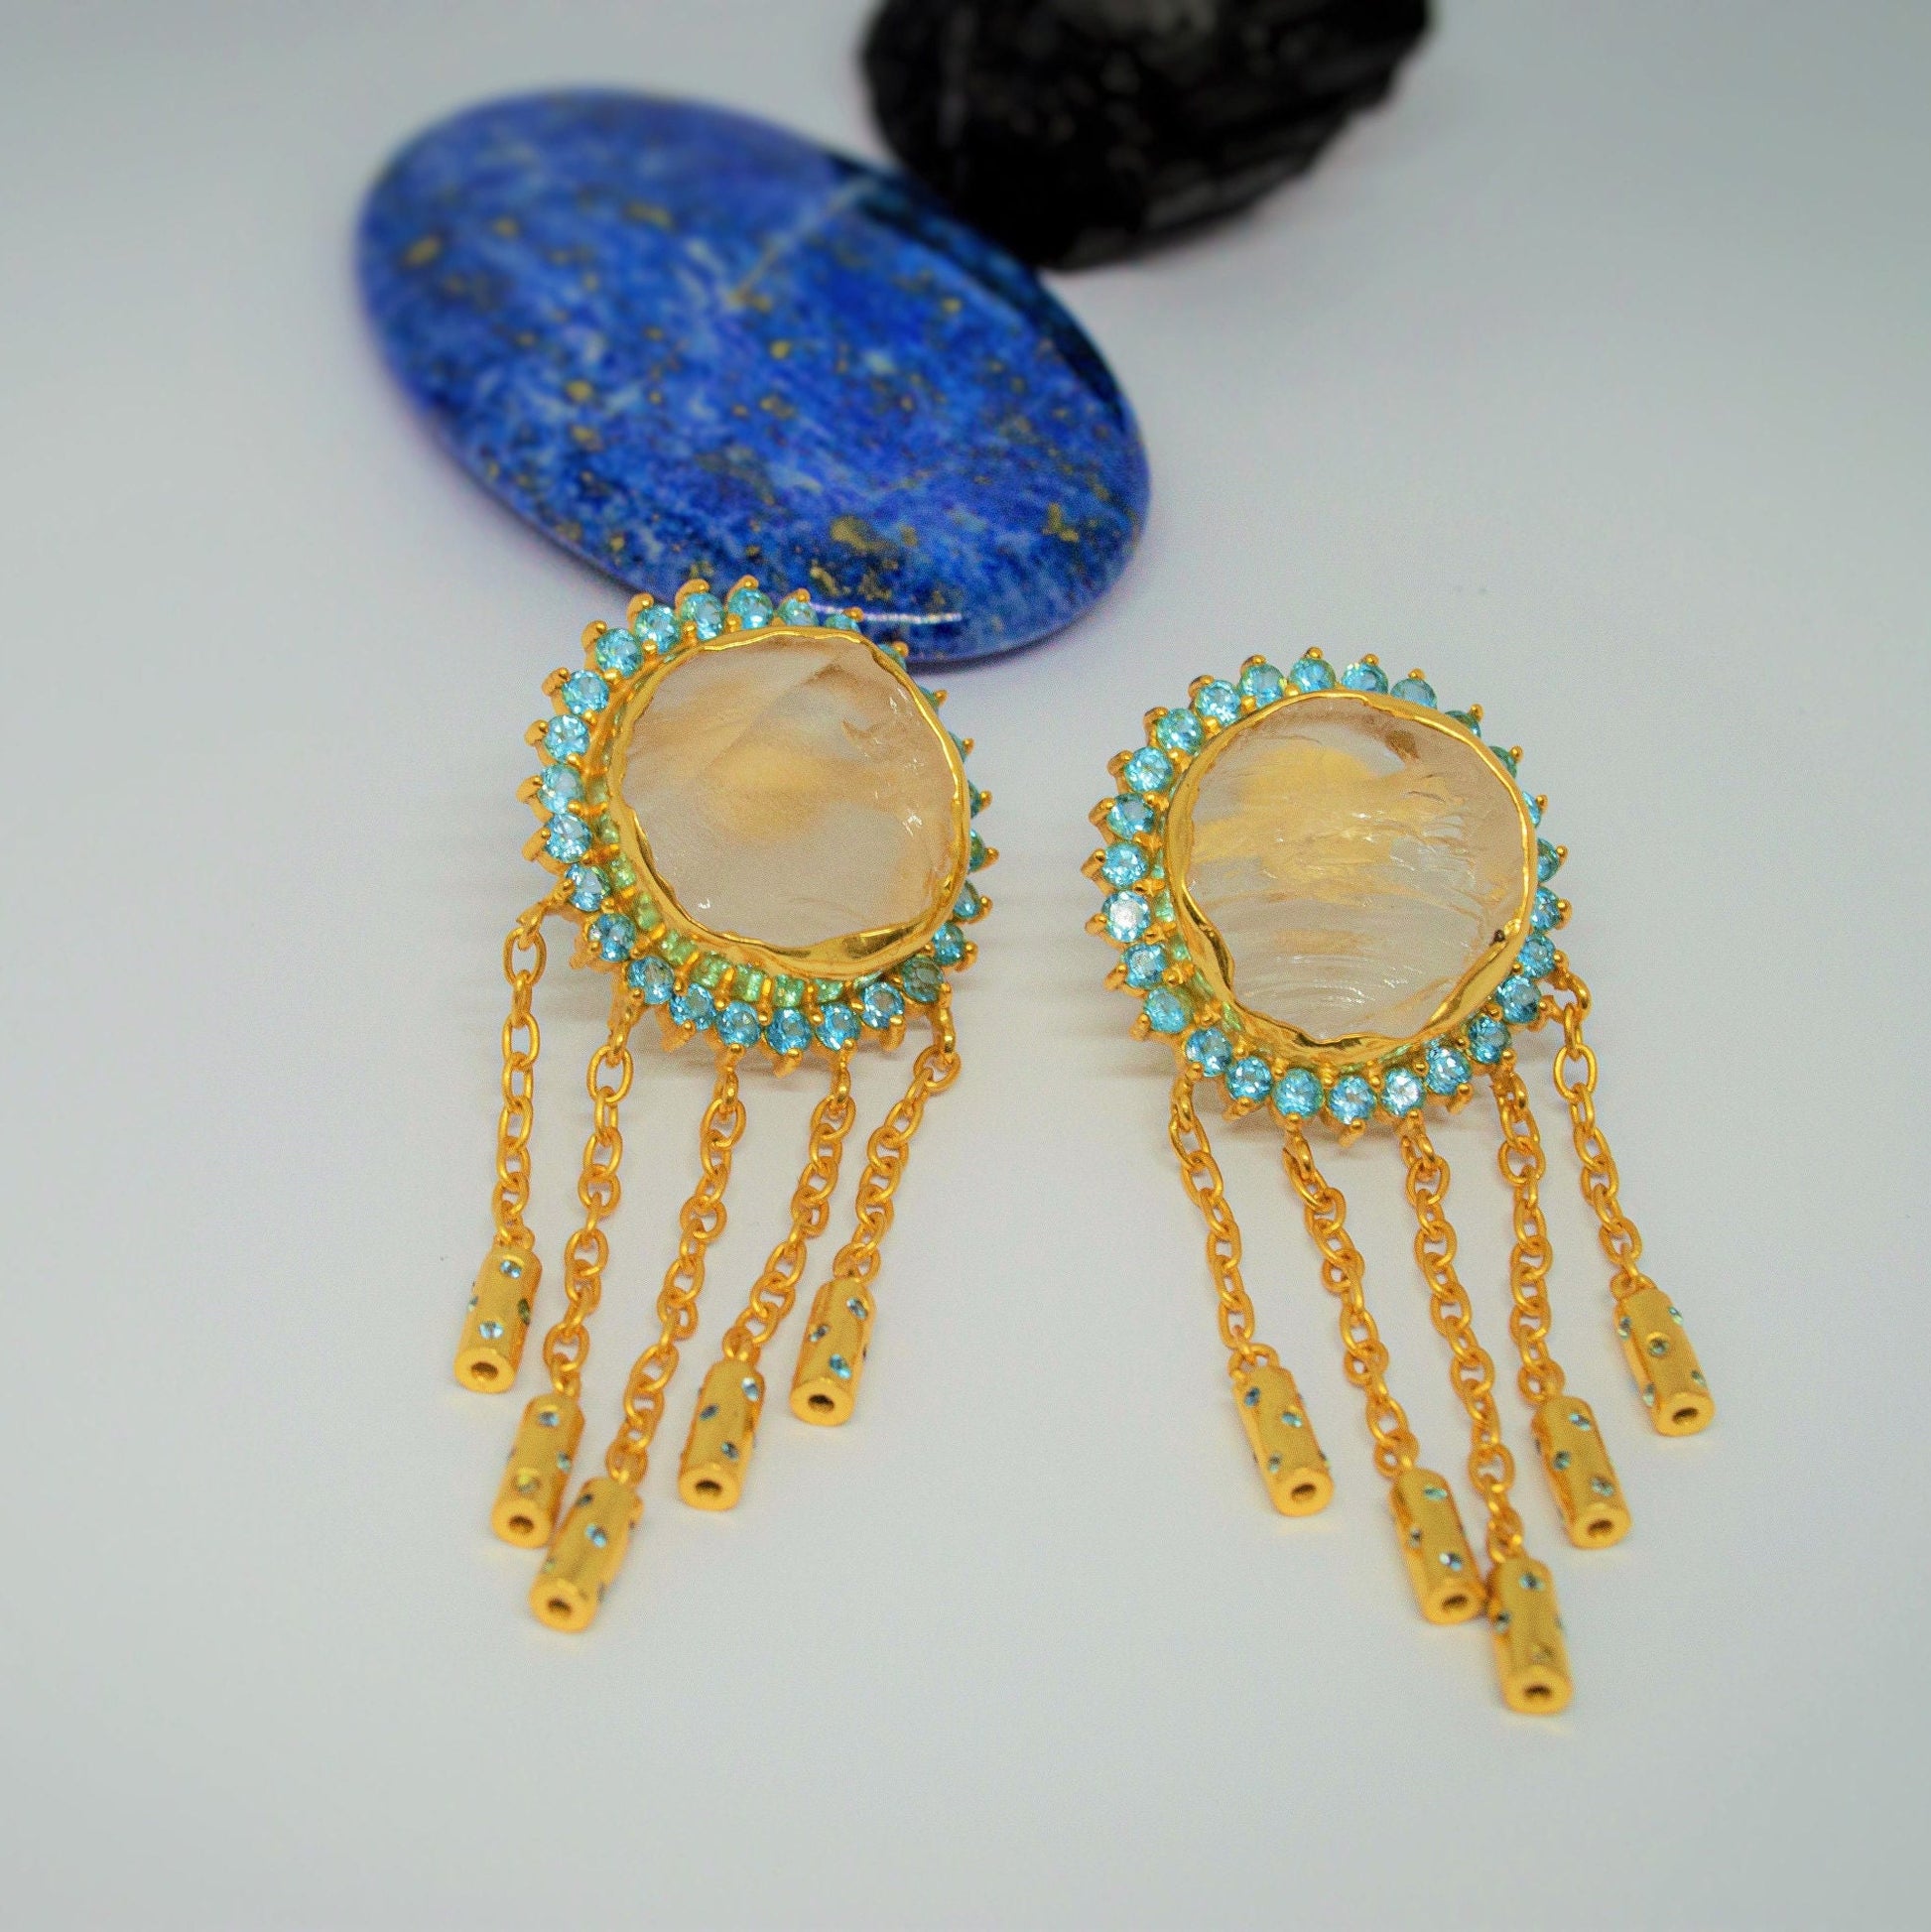 Blue Topaz, Clear Quartz Gold Earrings, Clear Quartz Crystal, Unique Statement Jhumka Earrings, December Birthstone, Gifts For Her